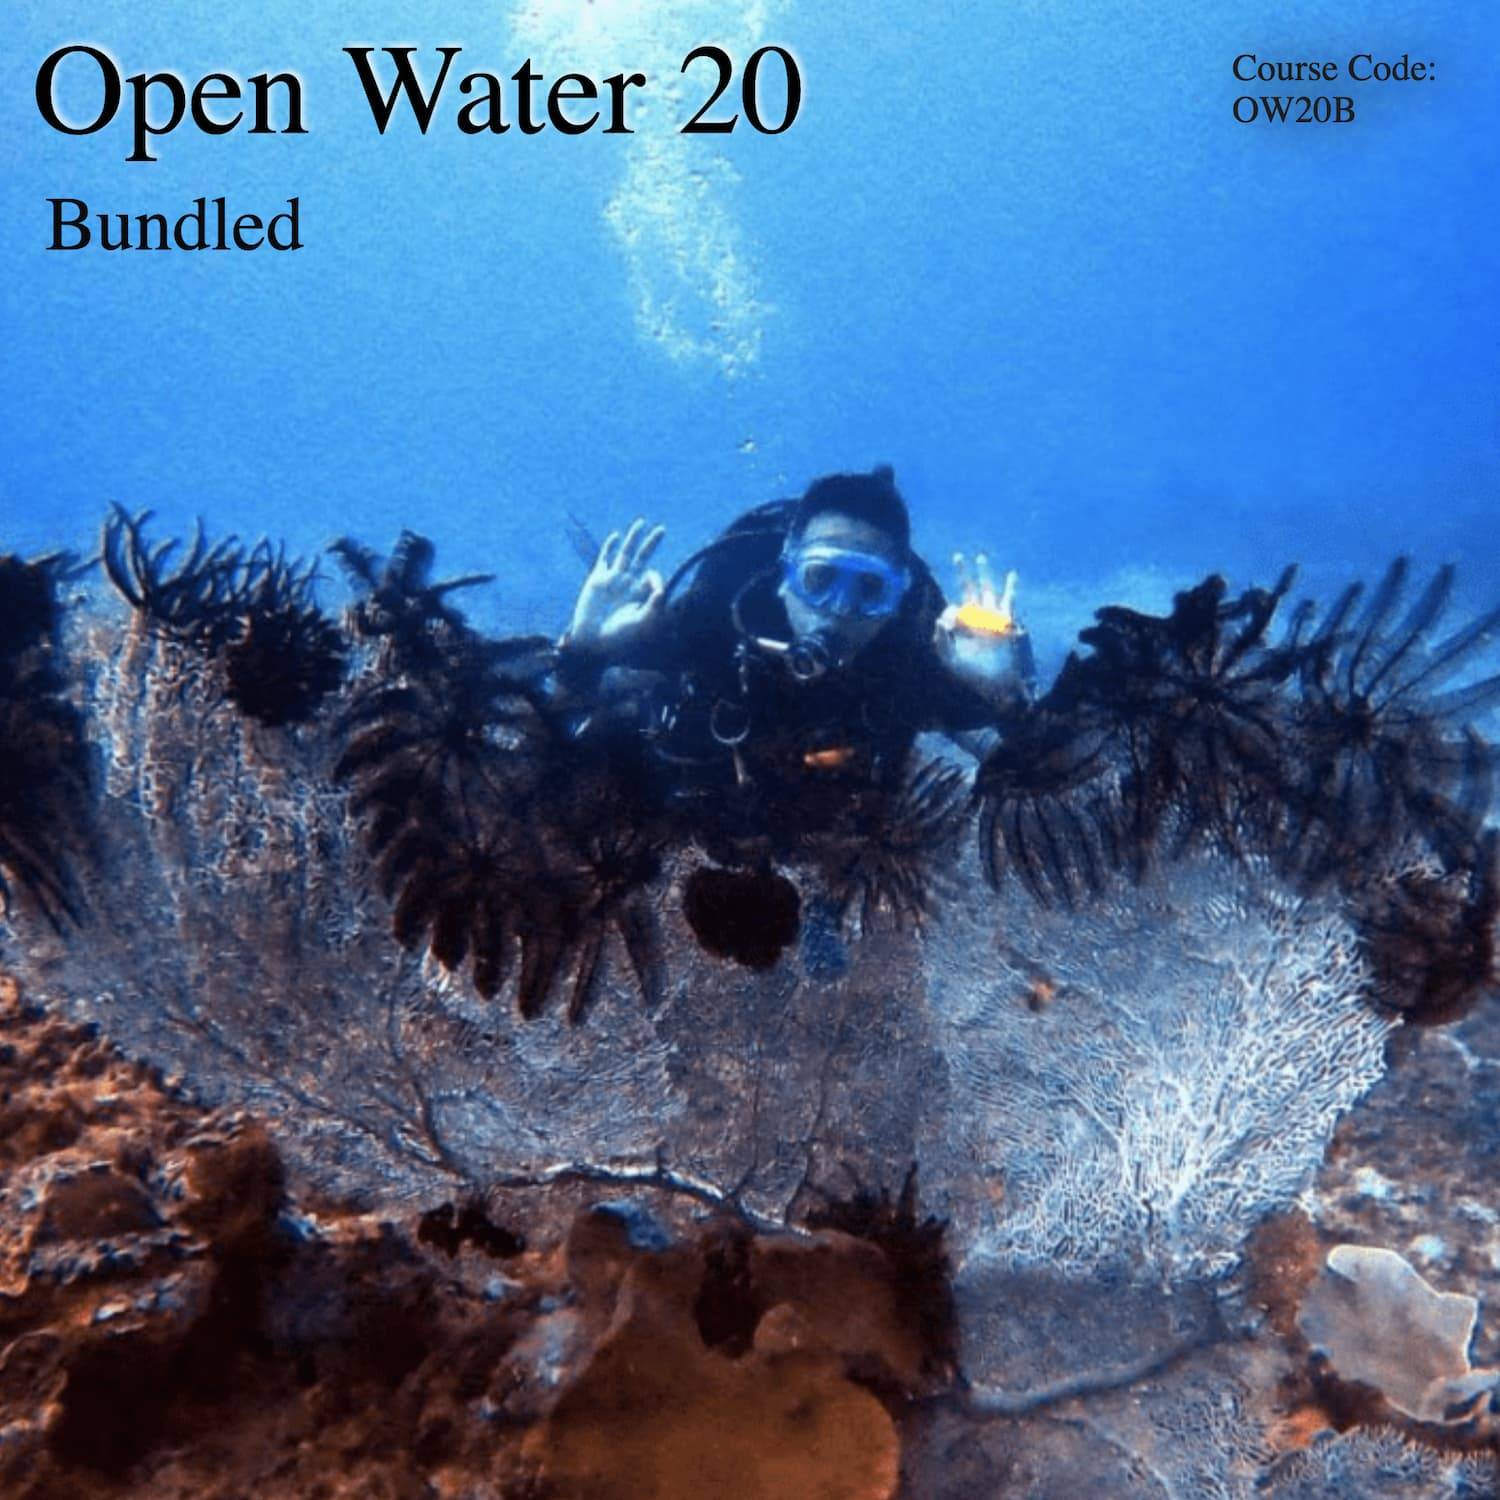 image of open water 20 bundle course